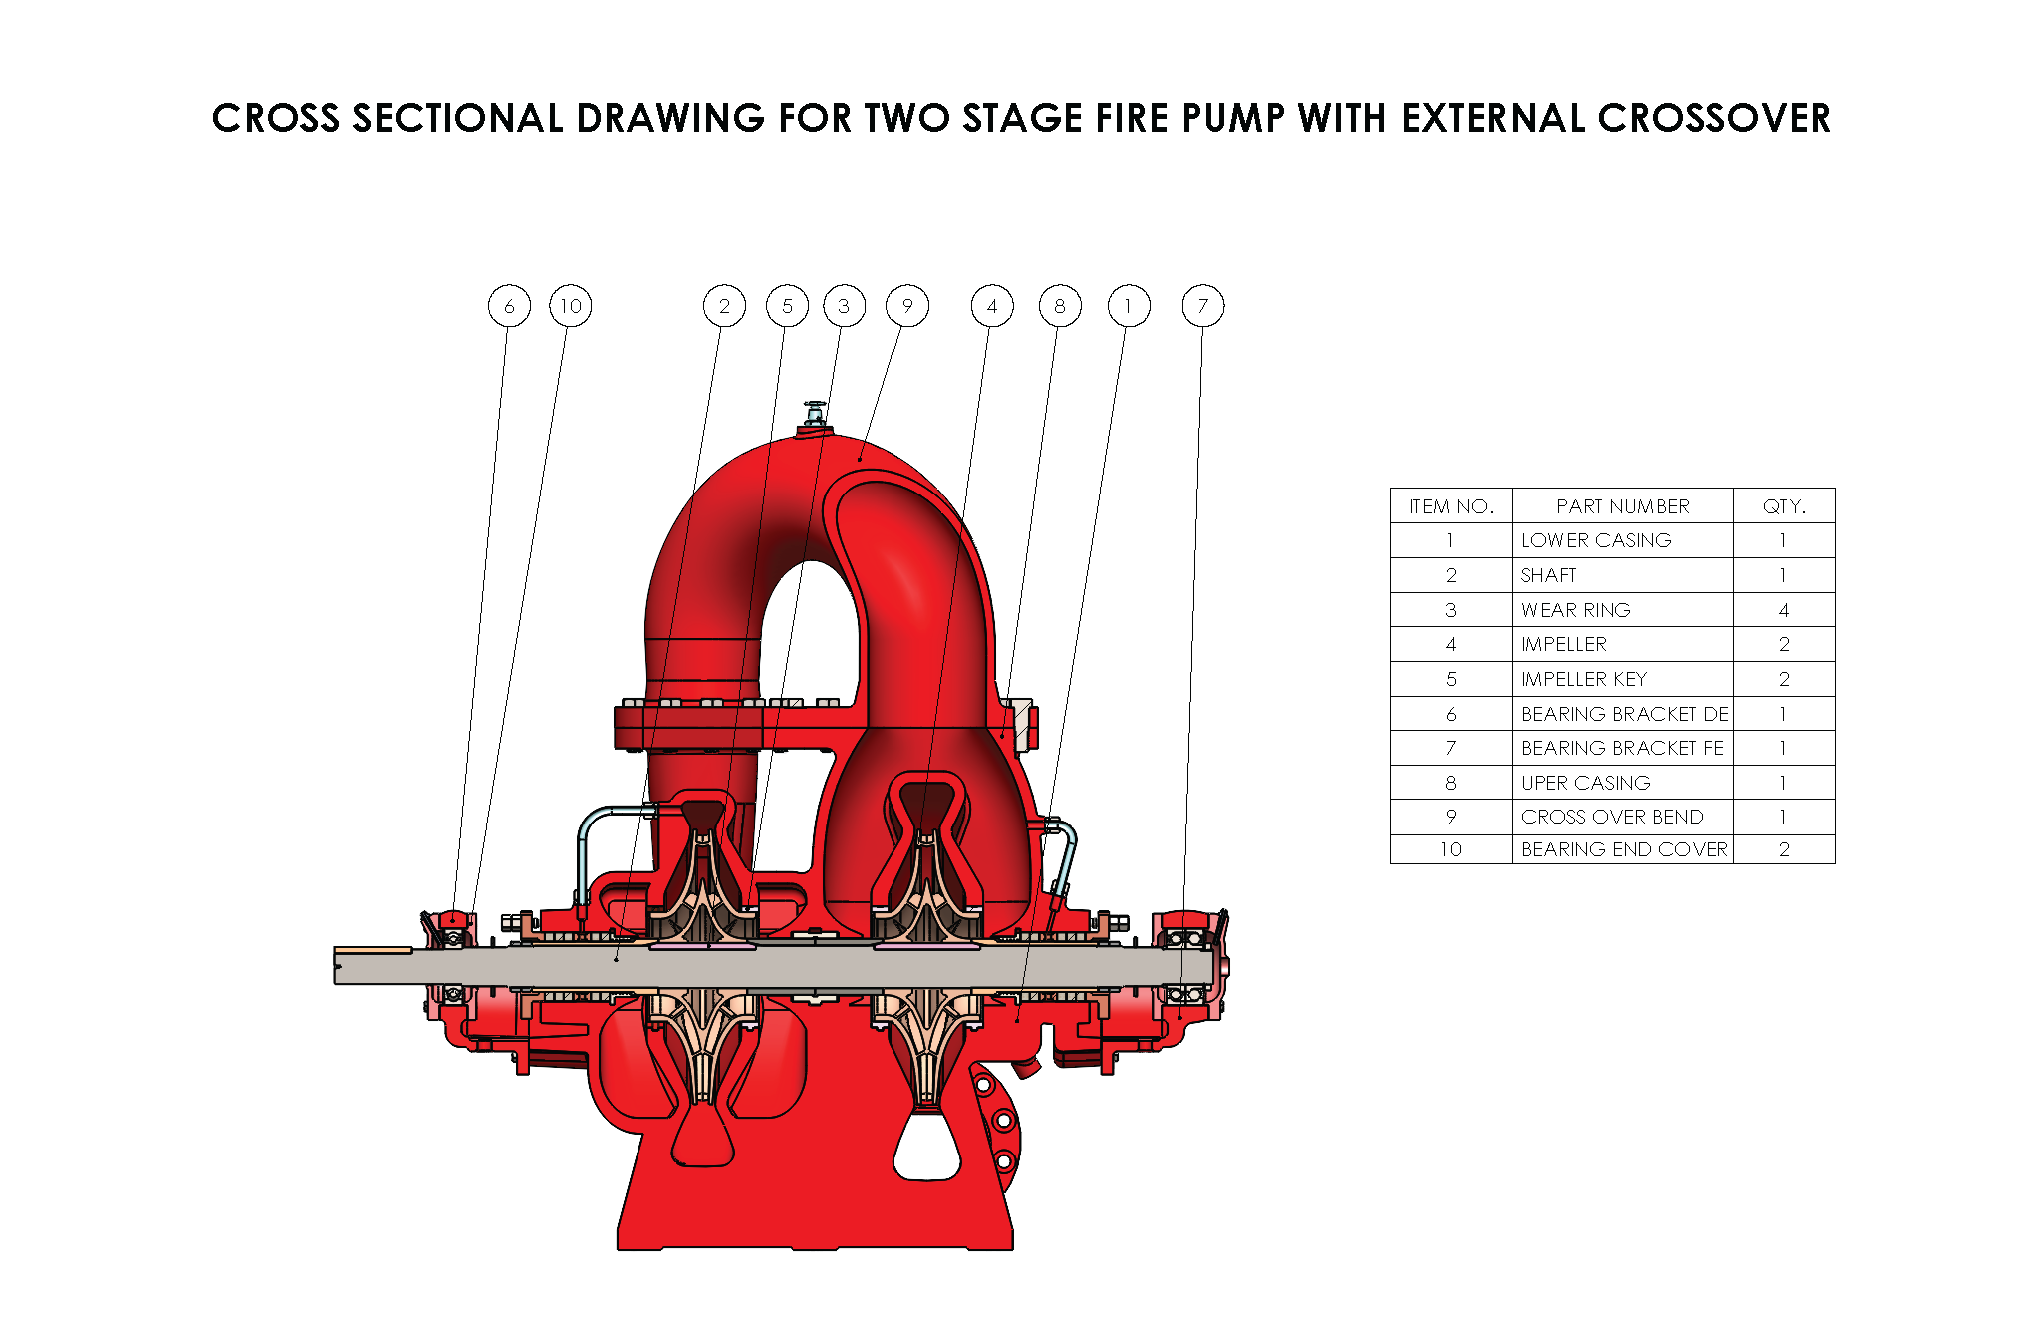 Cross Sectional Drawing For Two Stage Fire Pump With External Crossover